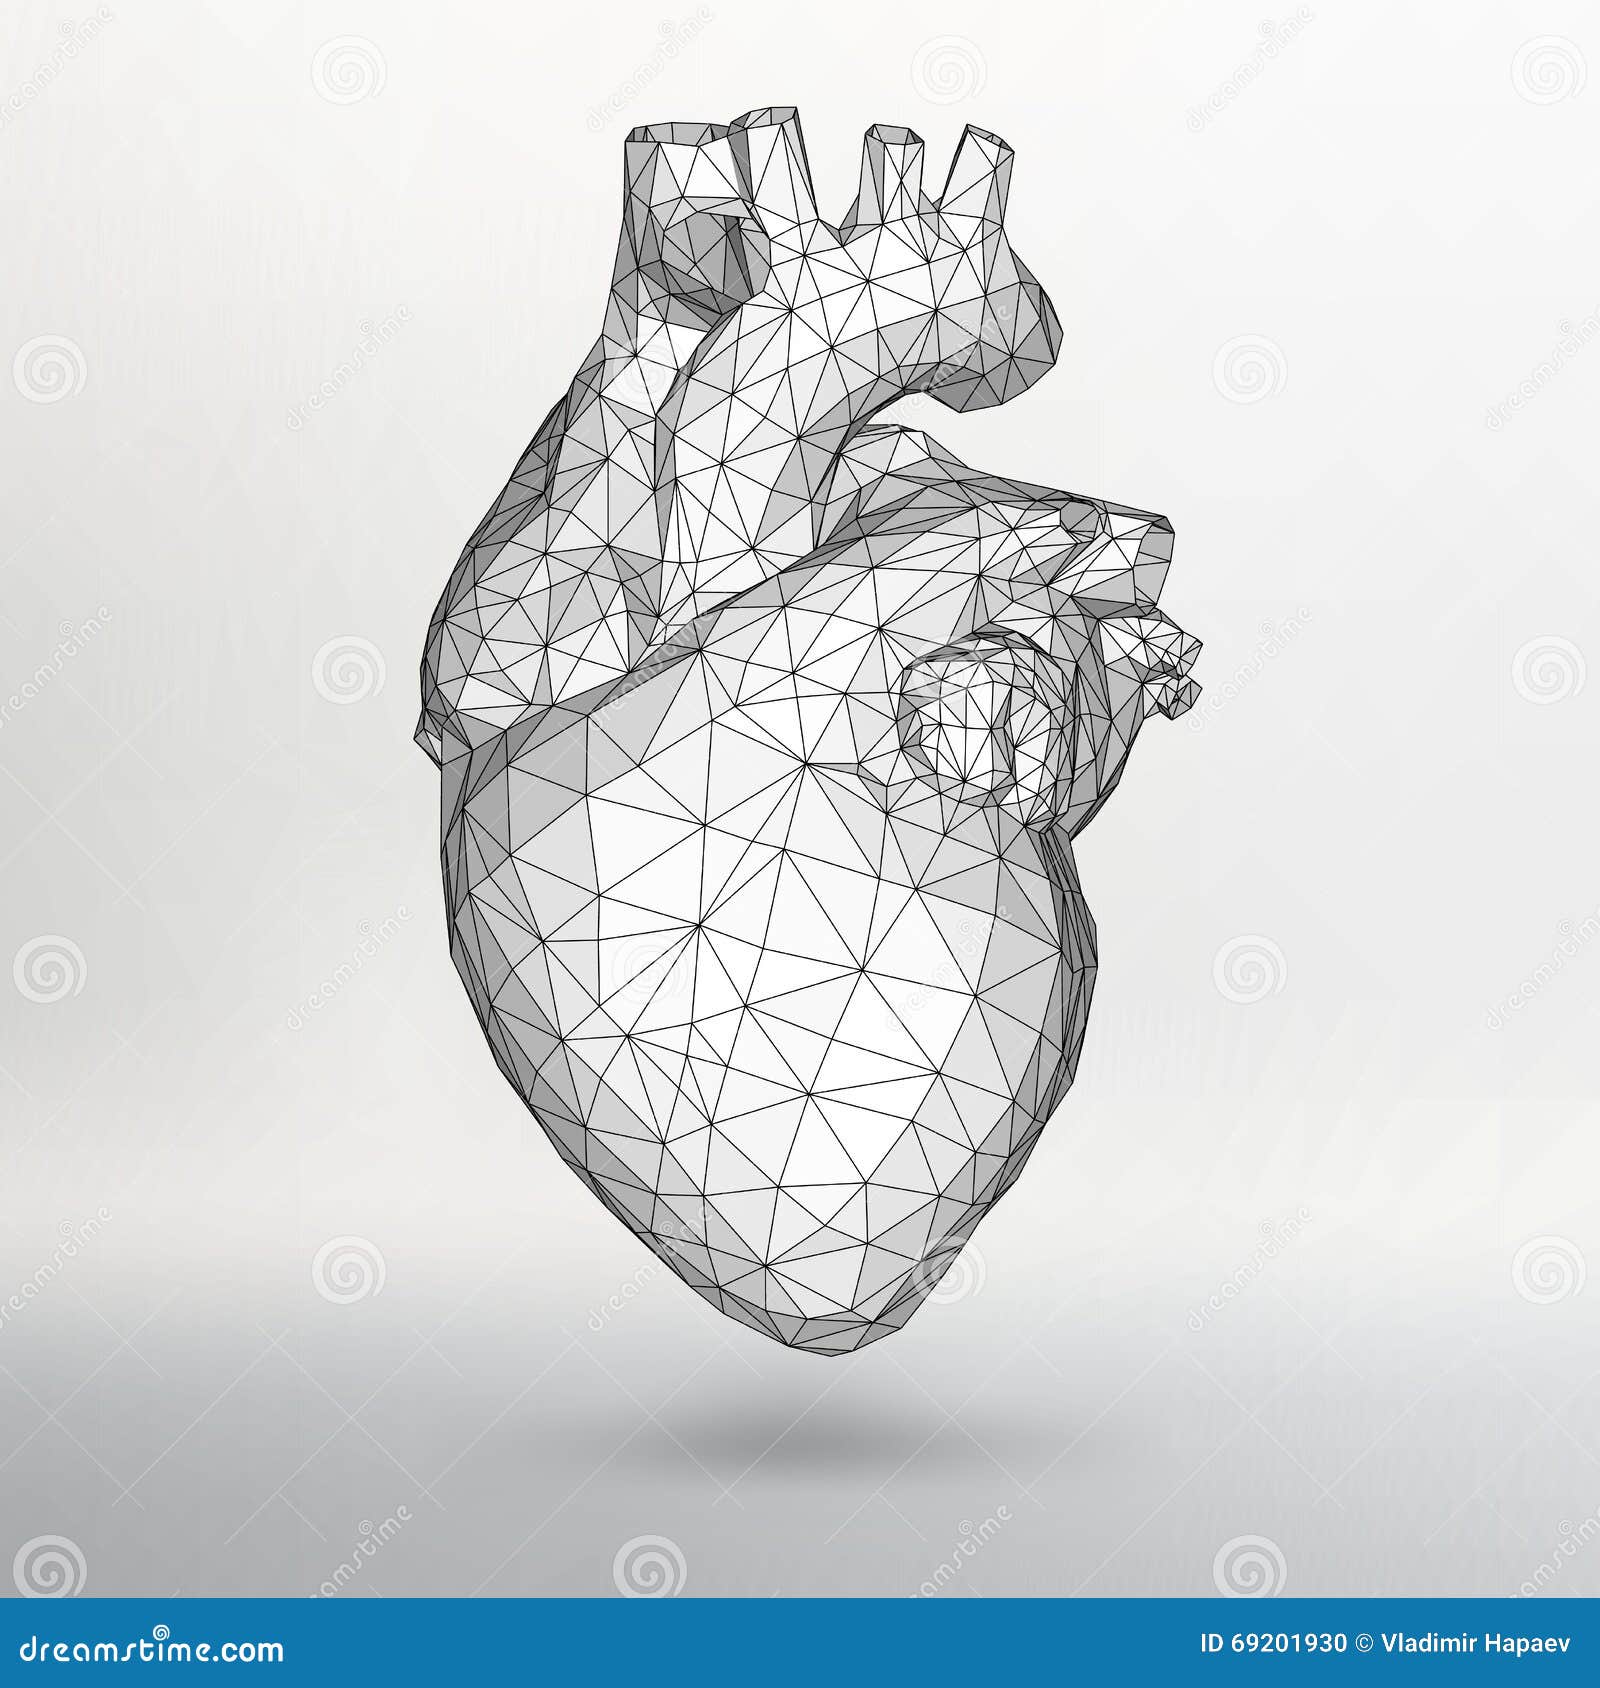 Creative Concept Background of the Human Heart. Vector ...